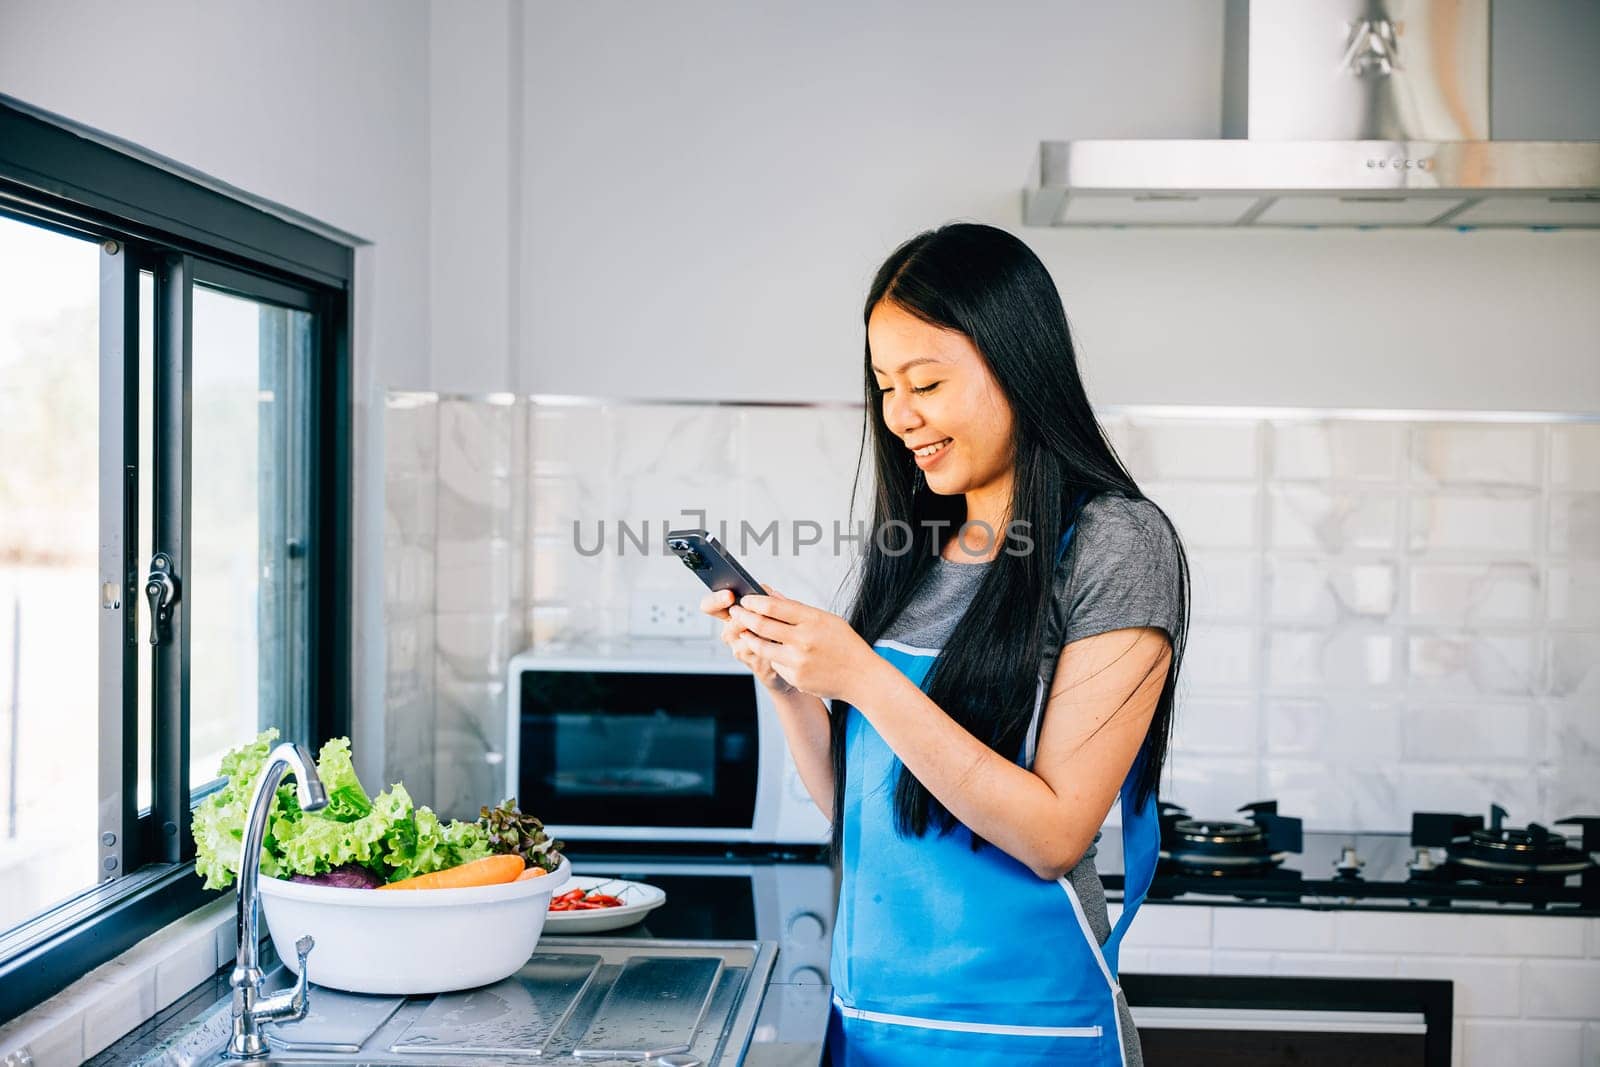 In a cozy kitchen an Asian woman cooks vegetables while browsing her smartphone for a cooking tutorial. Smiling and inspecting fruits she integrates modern tech into her cooking process.